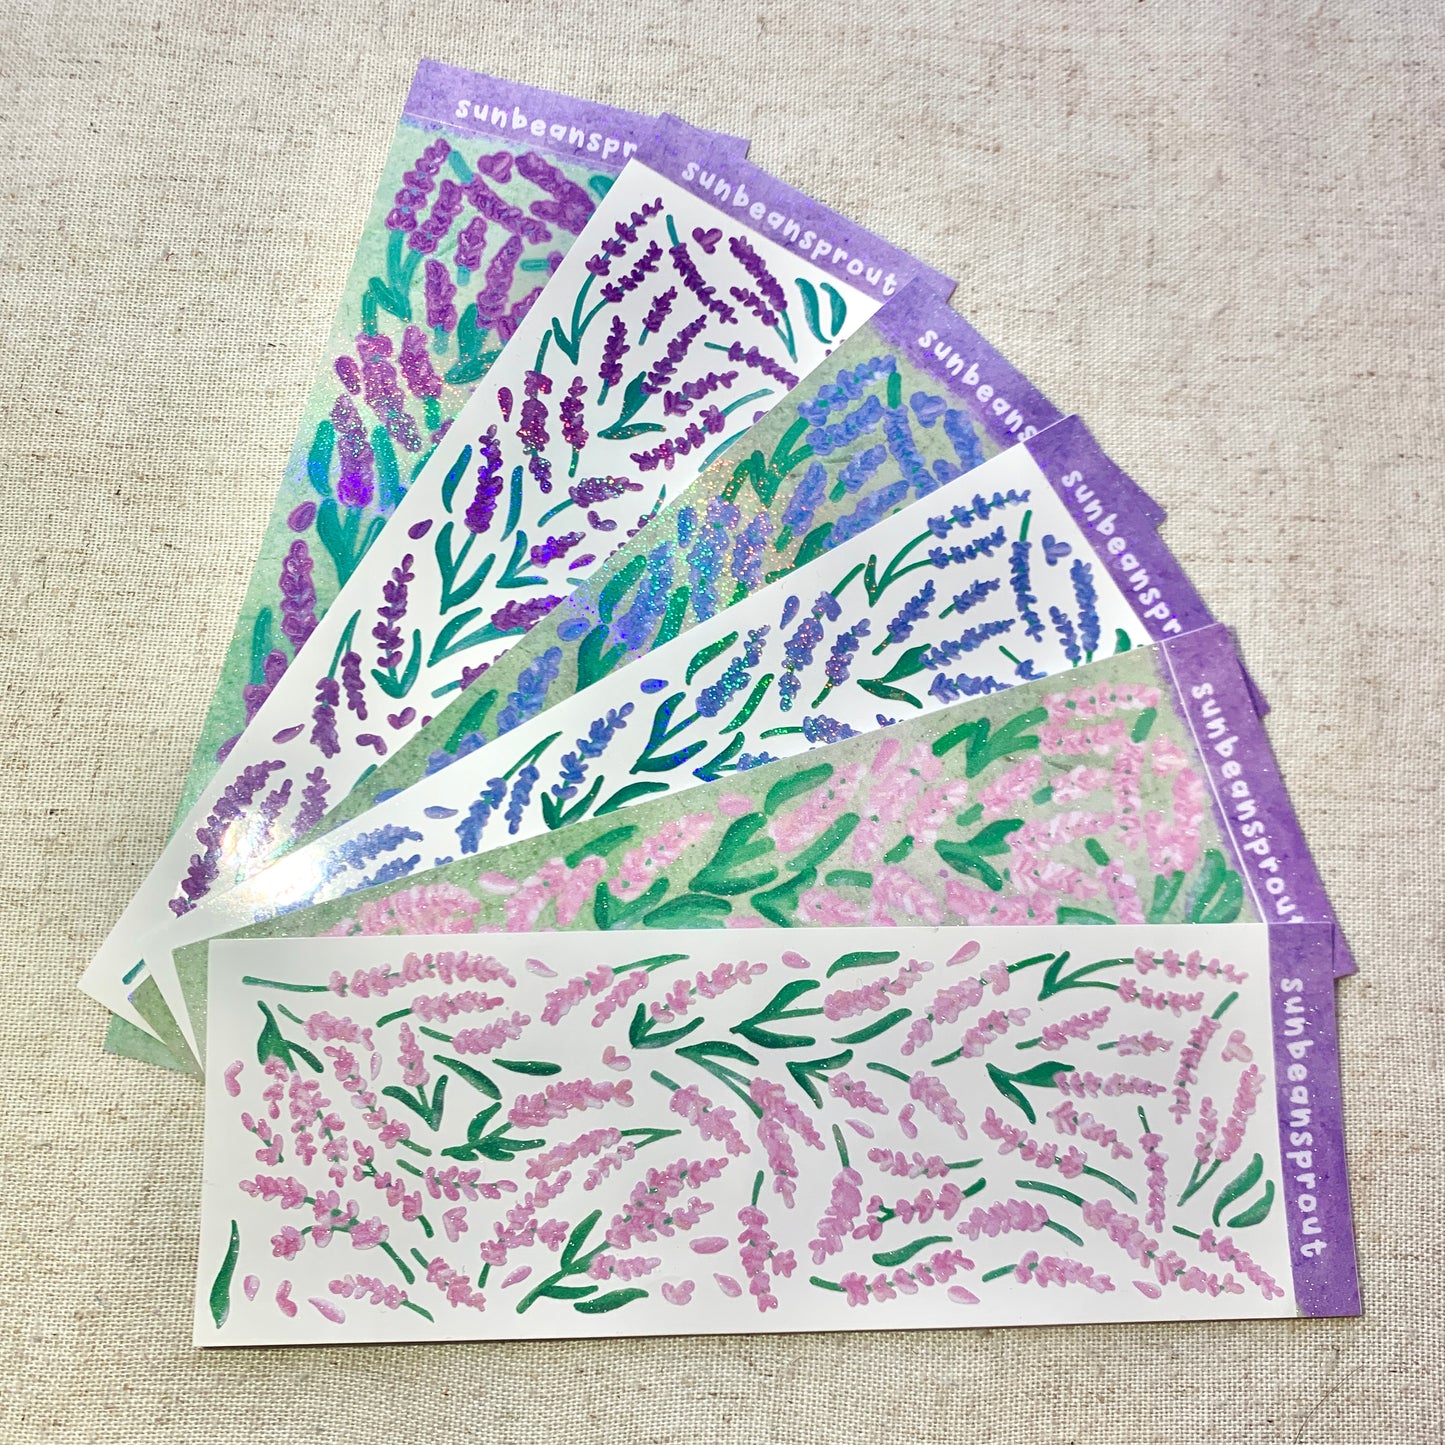 Glitter and Holographic Stickers